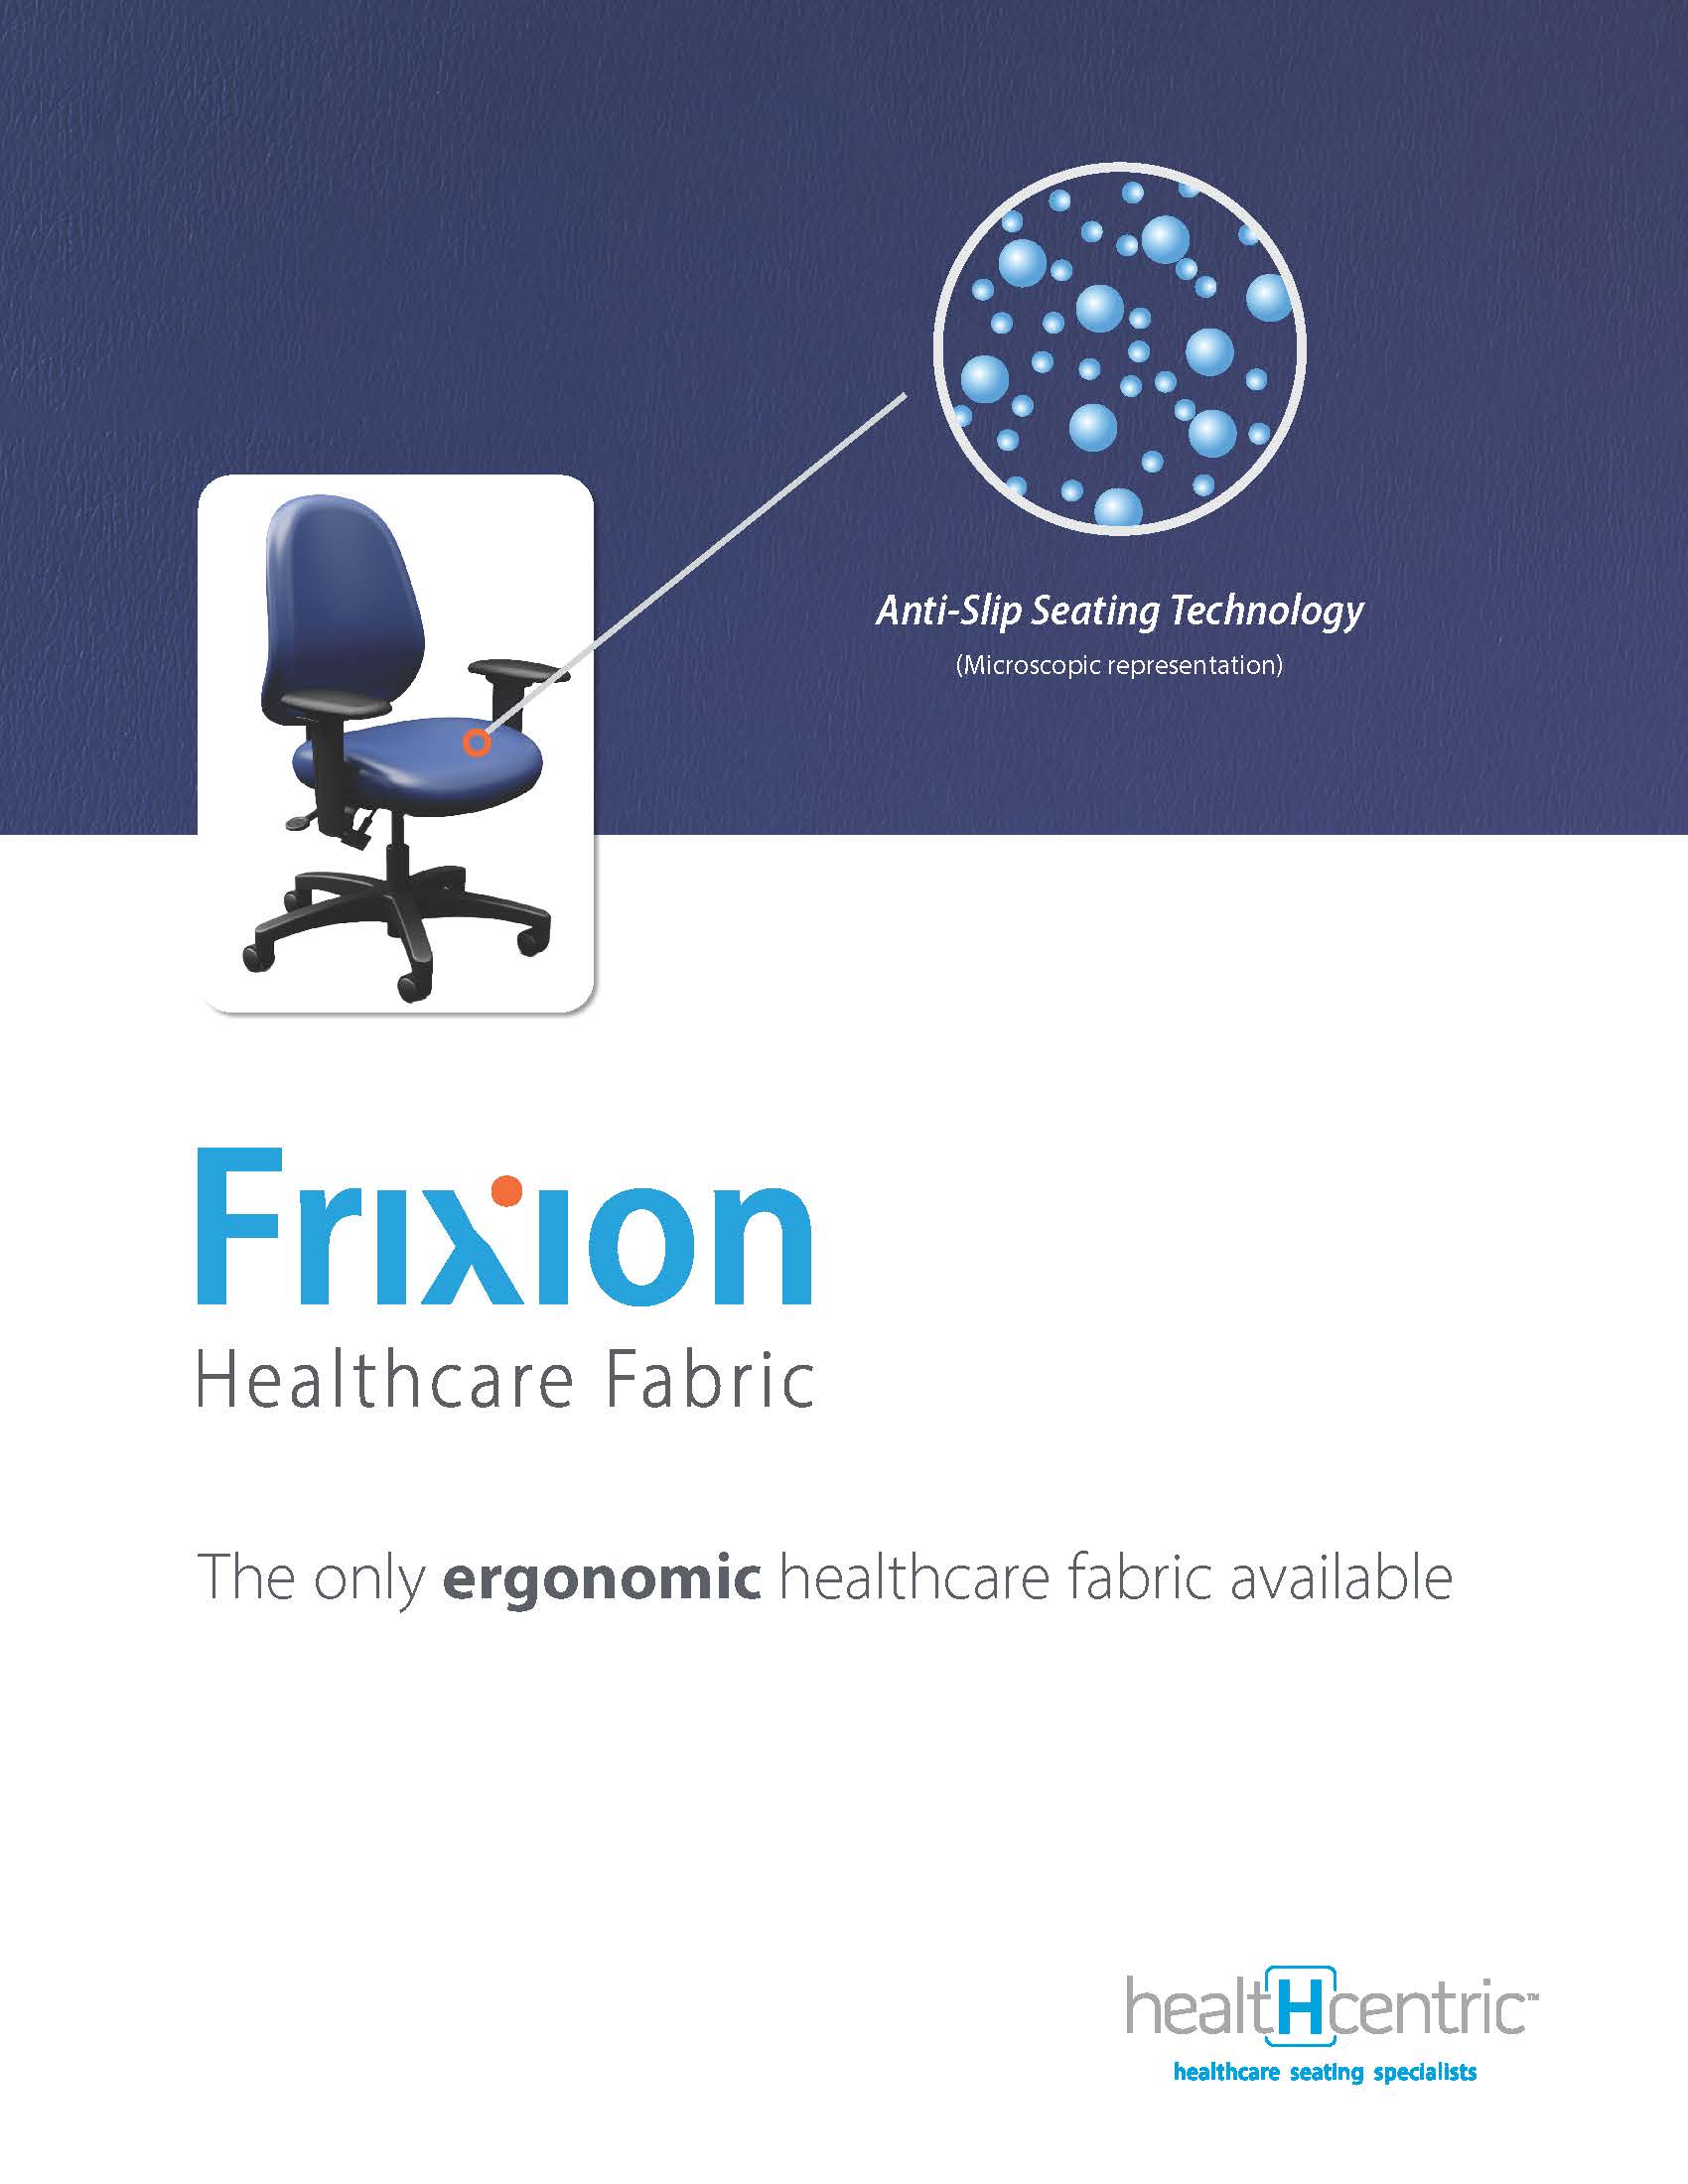 Frixion Healthcare Fabric